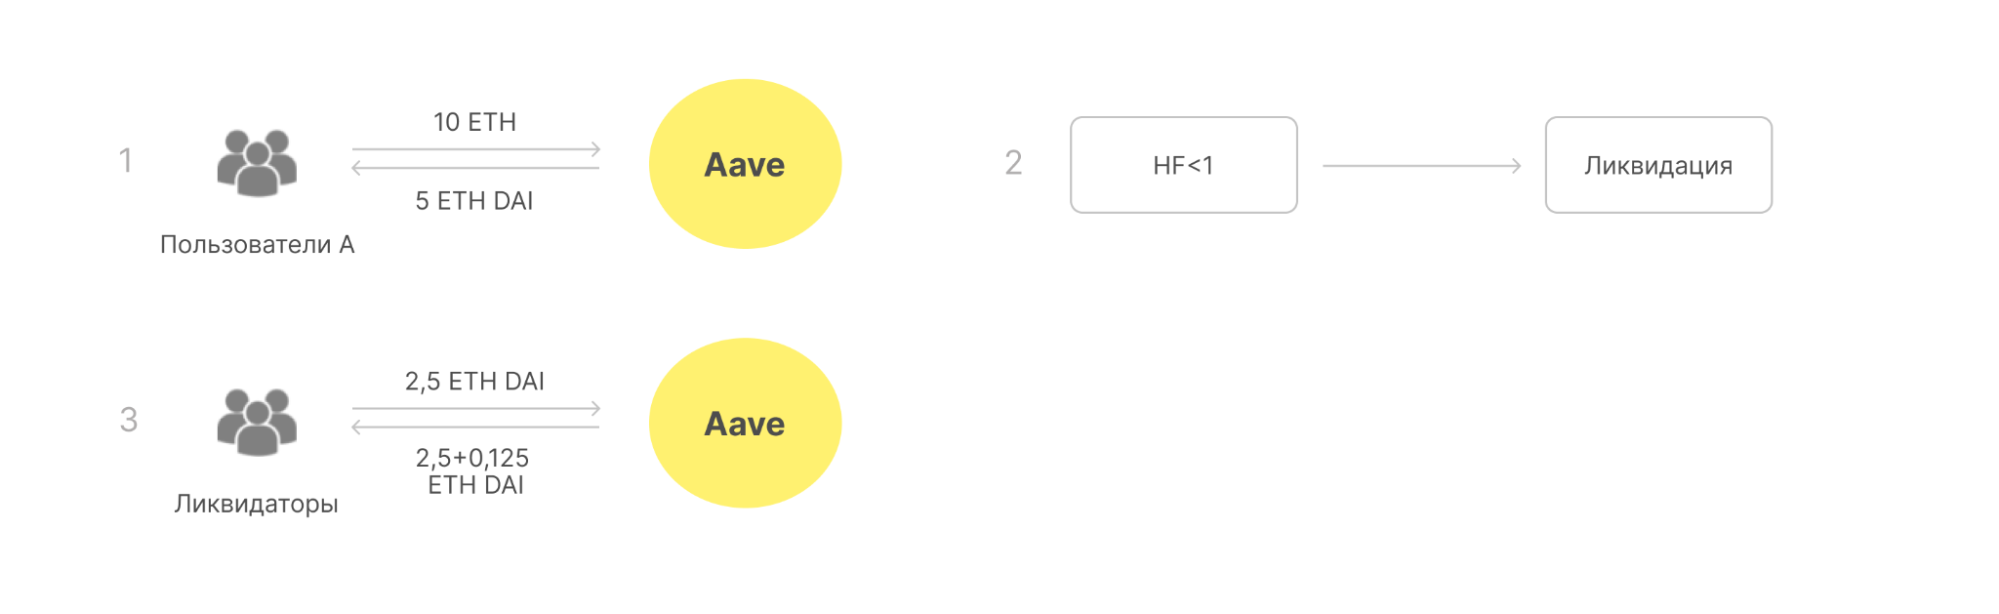 Aave прогноз. Aave. Кредитный протокол Aave. Aave криптовалюта. Расшифровка криптовалюты Aave.